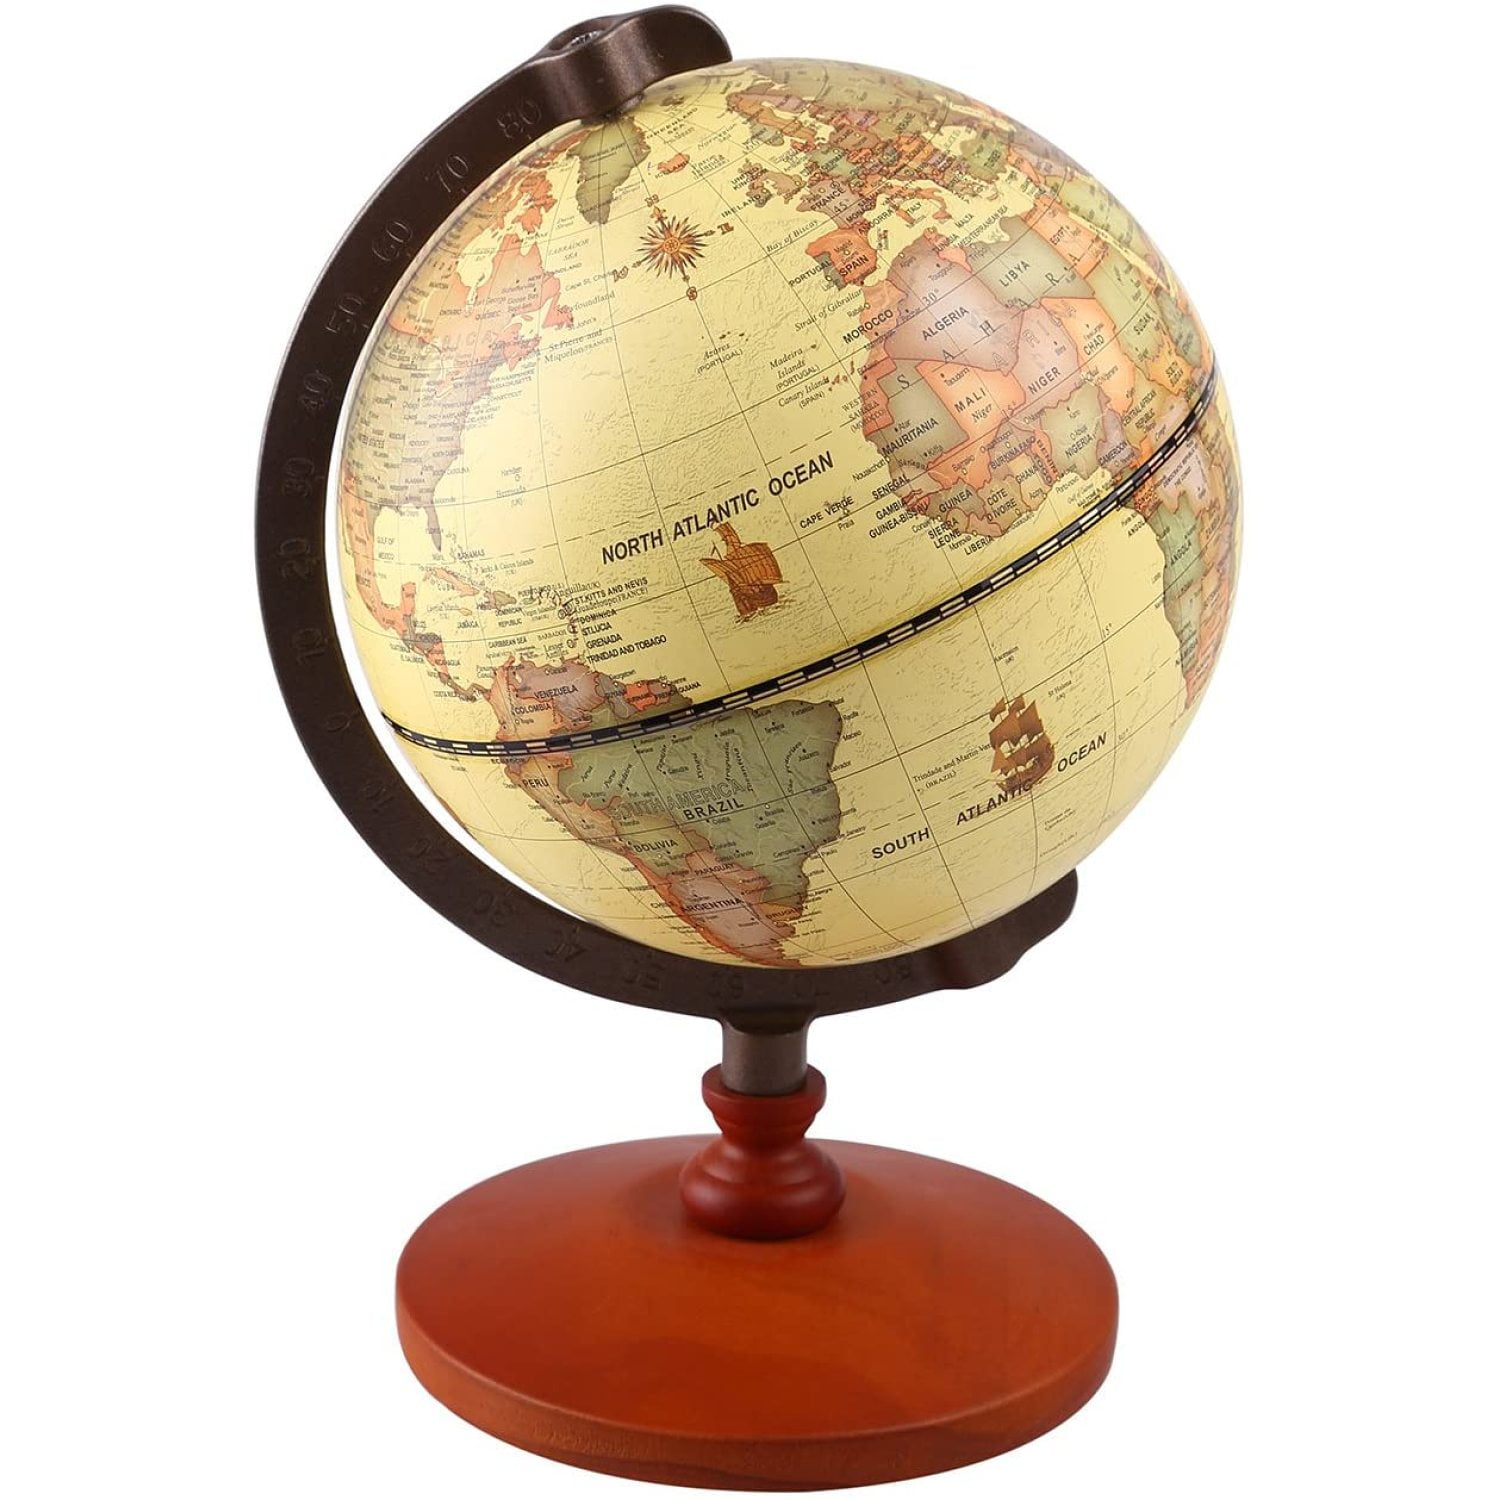 Antique brass 8" world map table globe office decor with wooden tripod stand 